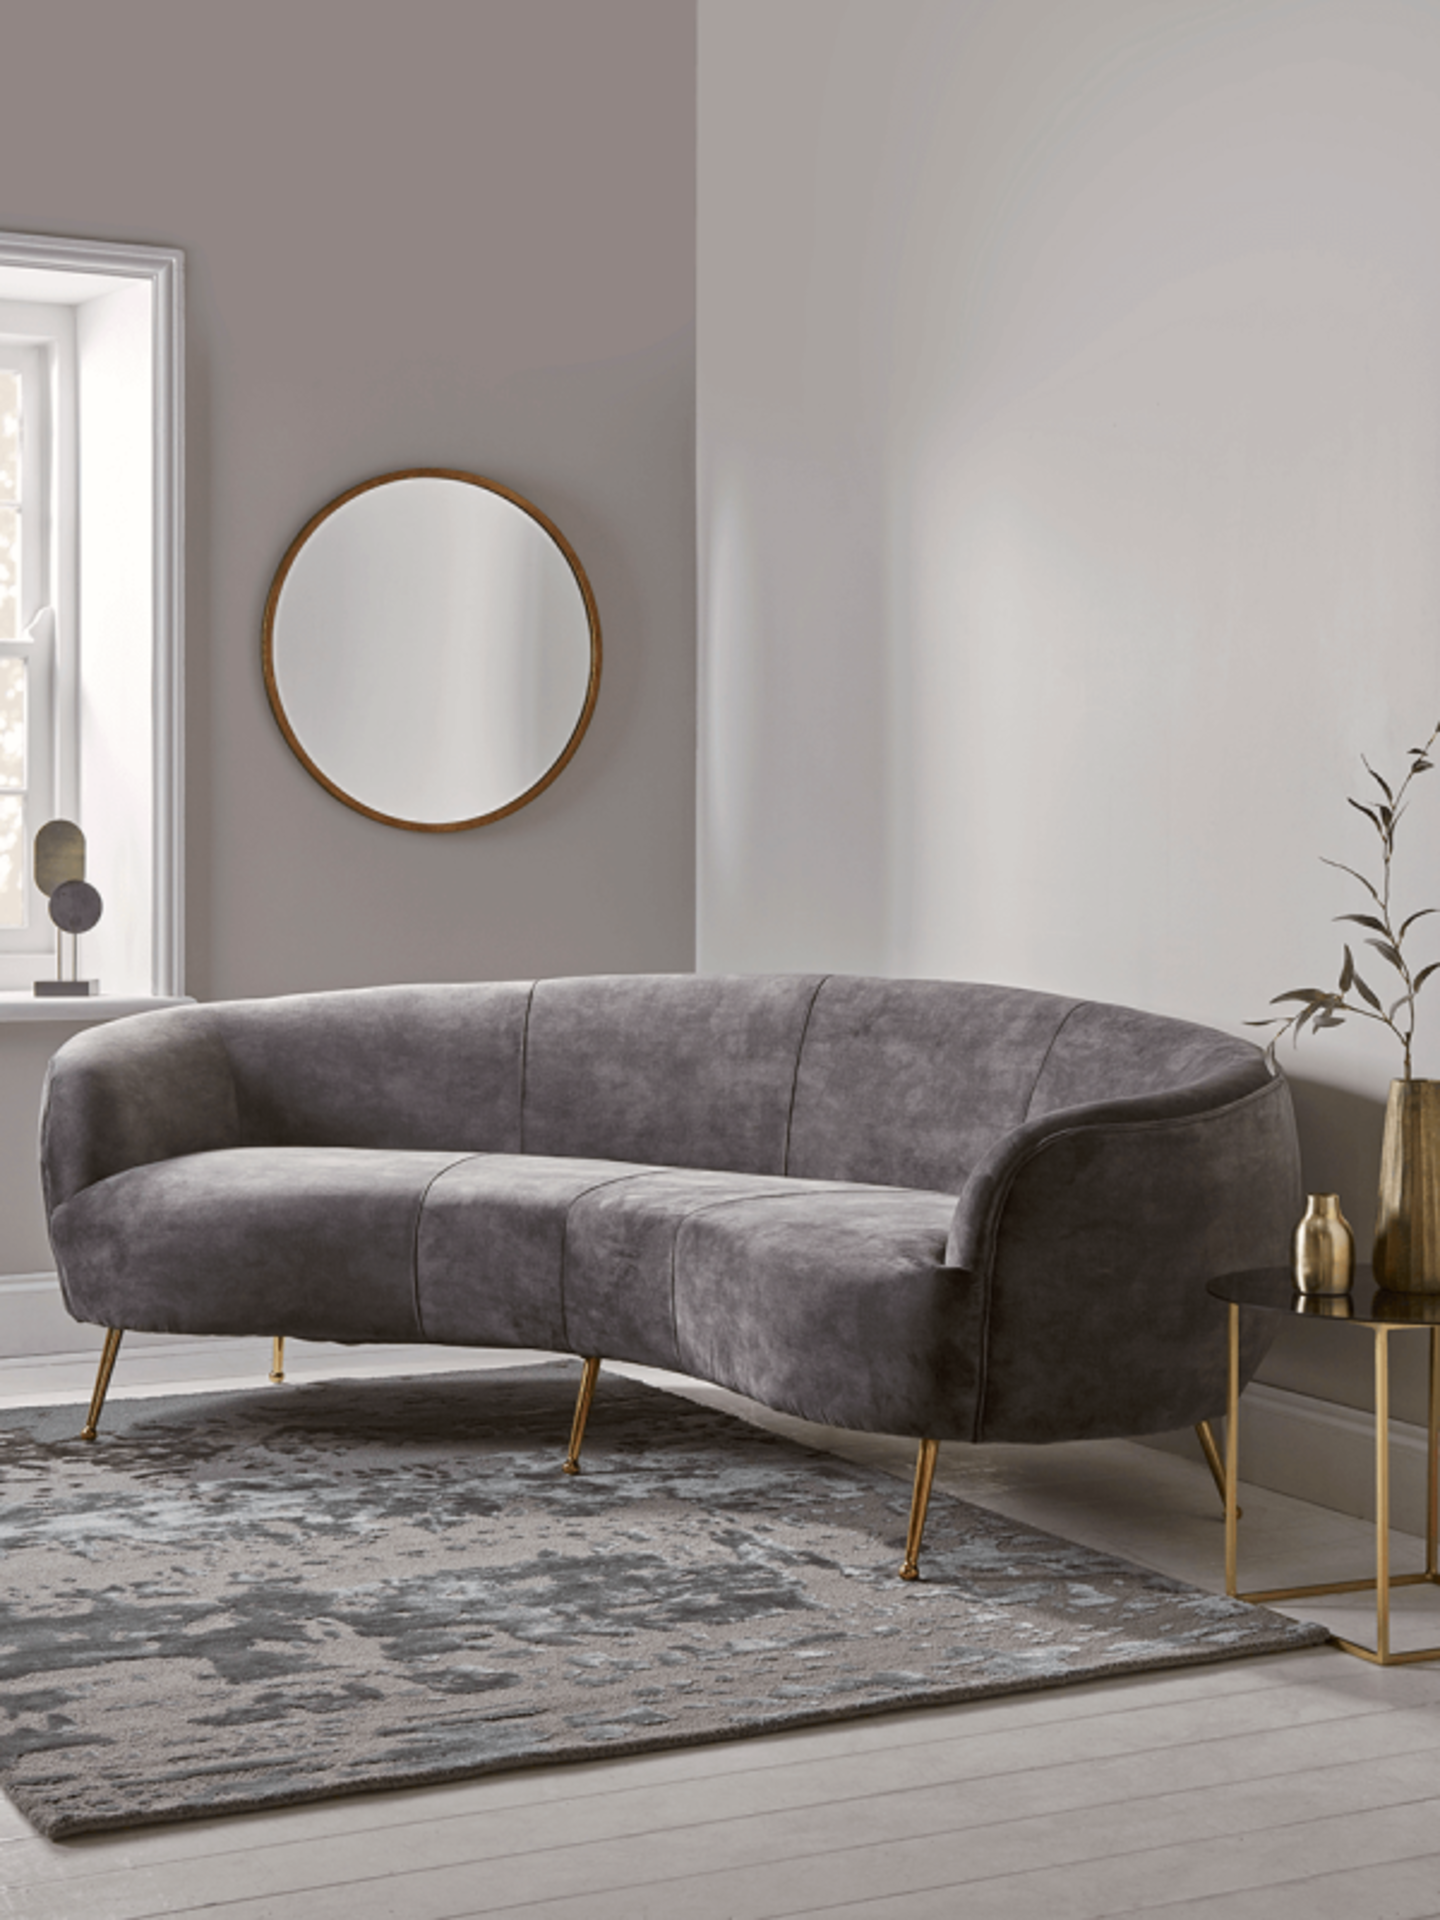 VAT Cox & Cox Deep Grey Velvet Curved Sofa RRP ô?2495.00 - This product has been graded in BC